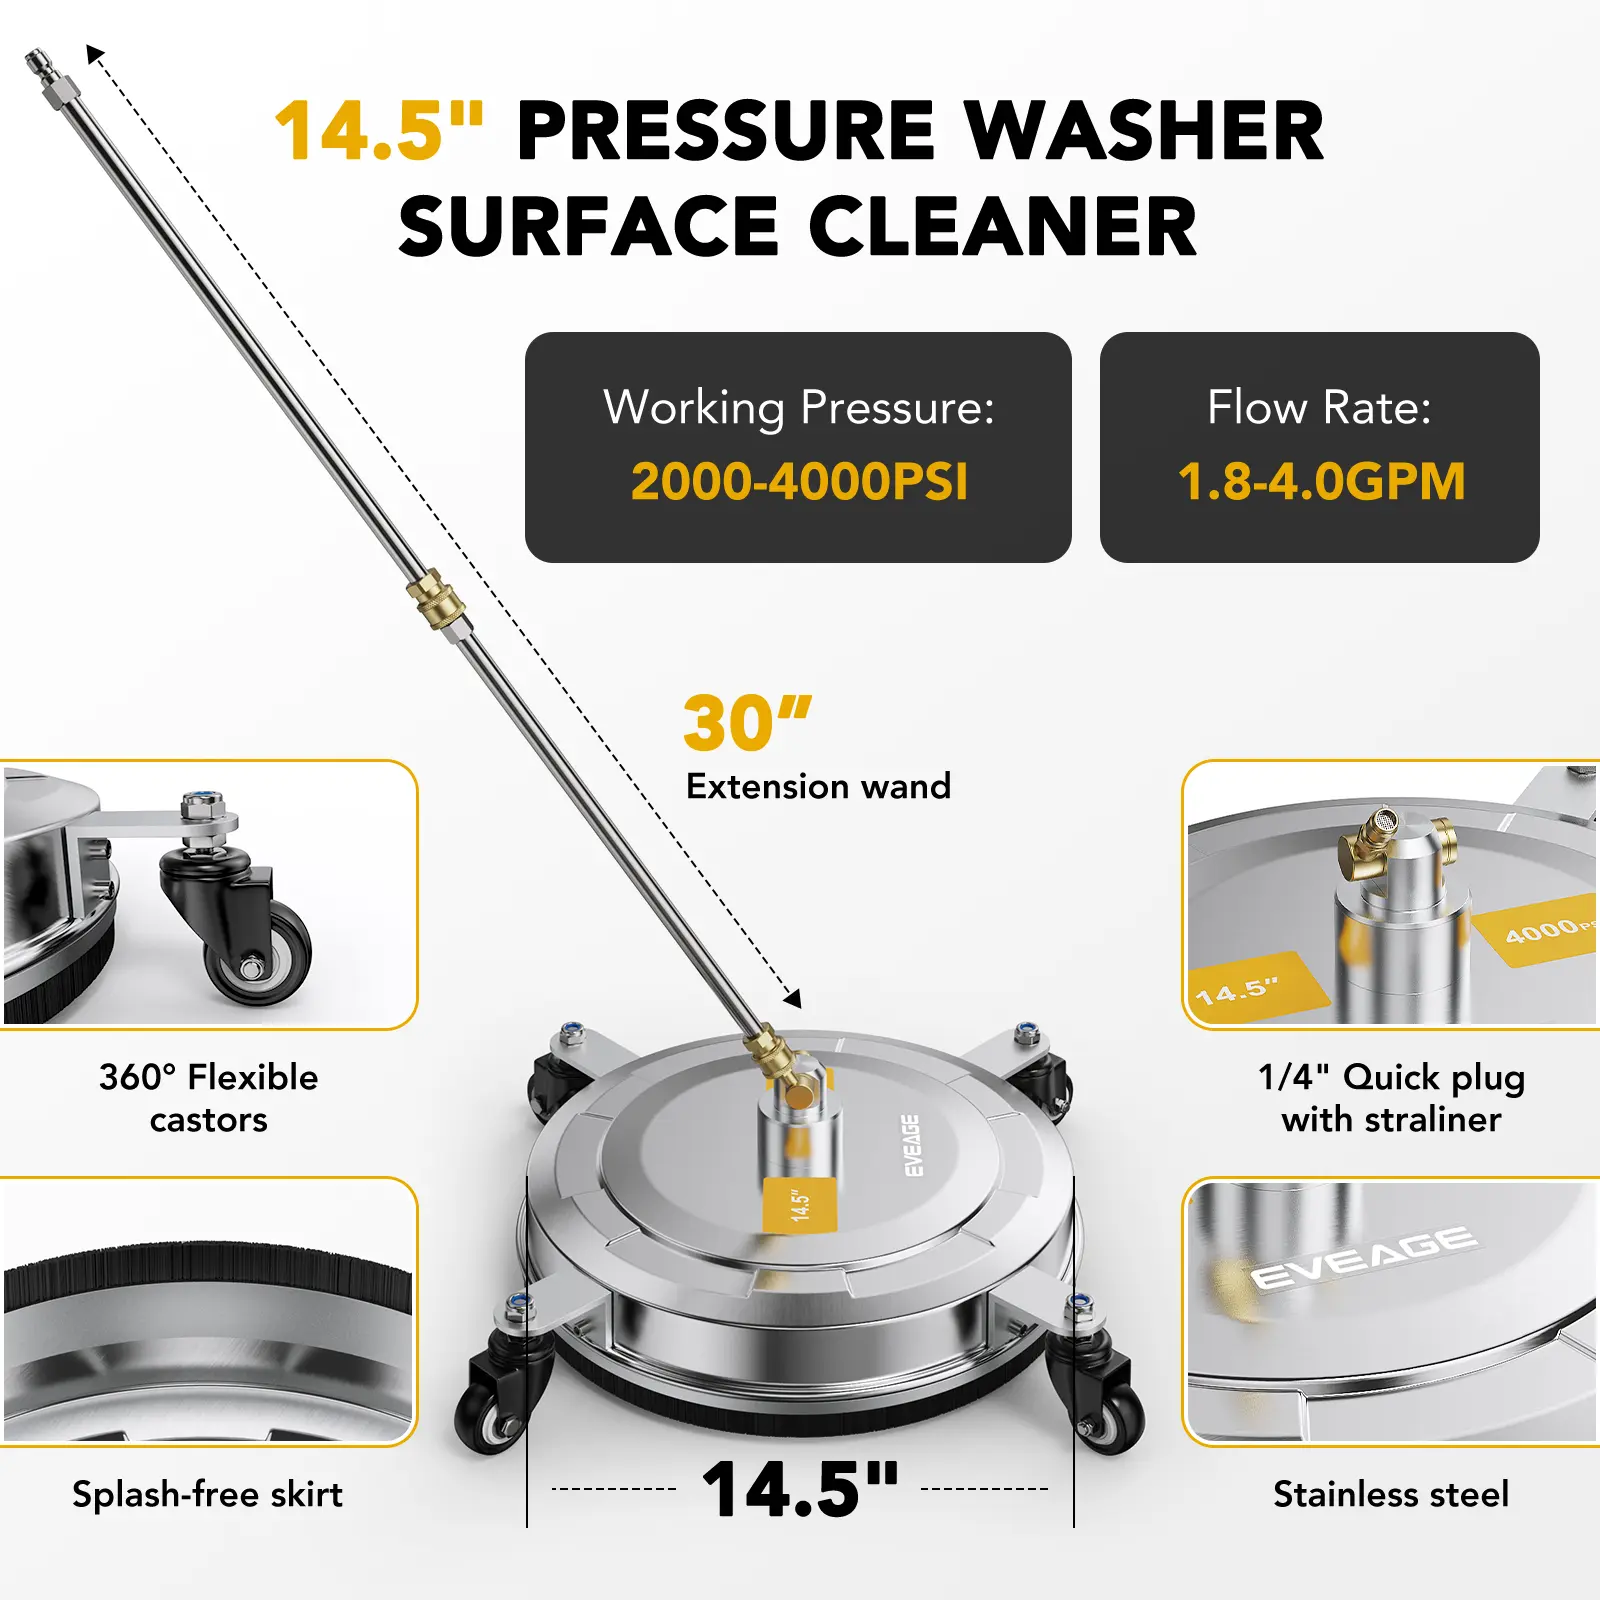 Eveage 14.5 surface cleaner pressure washer